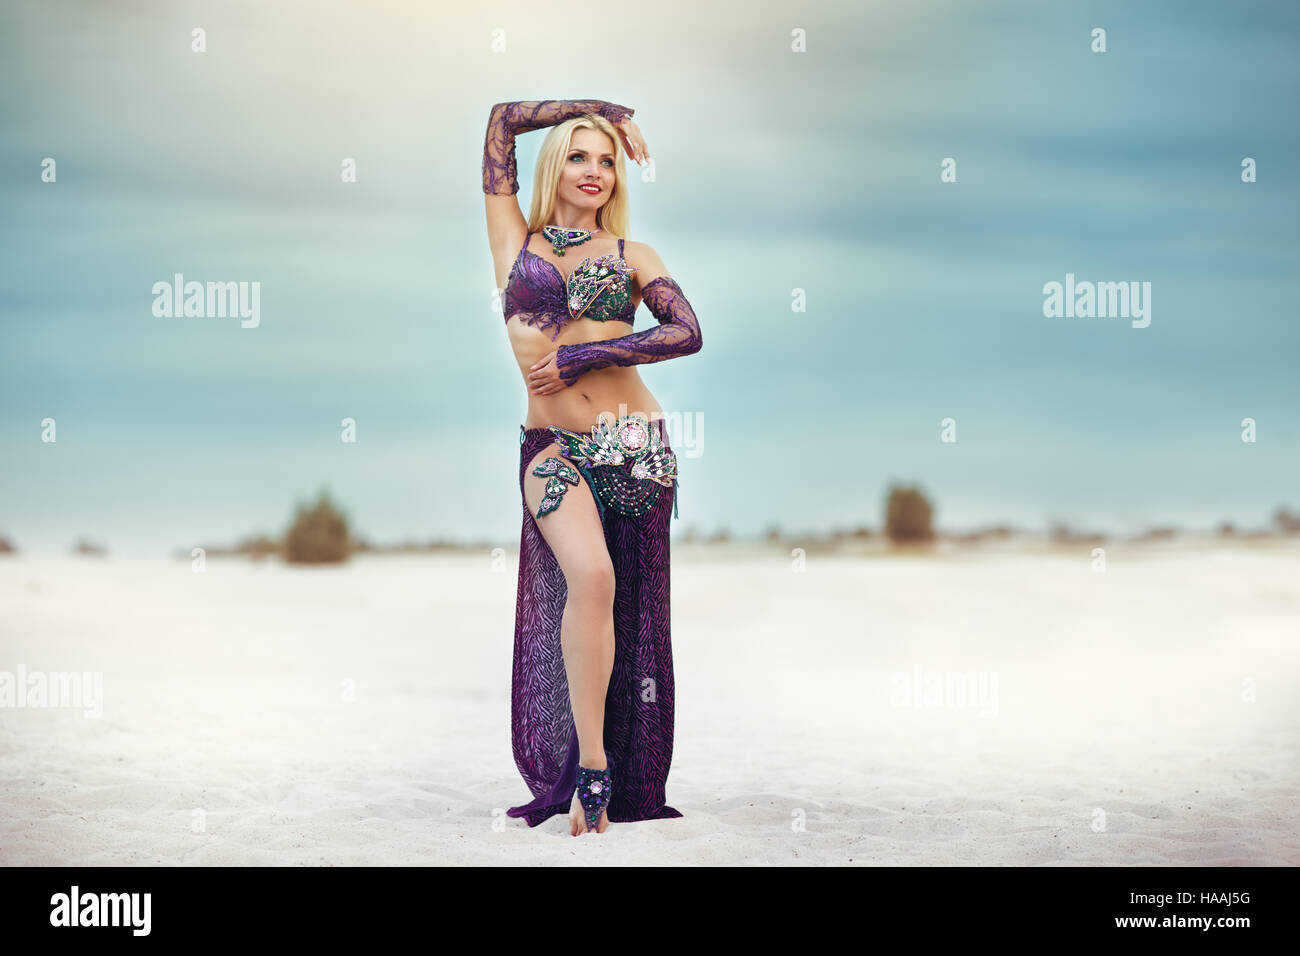 Beautidul smiling lady dancing Belly dance in the sands desert Stock Photo